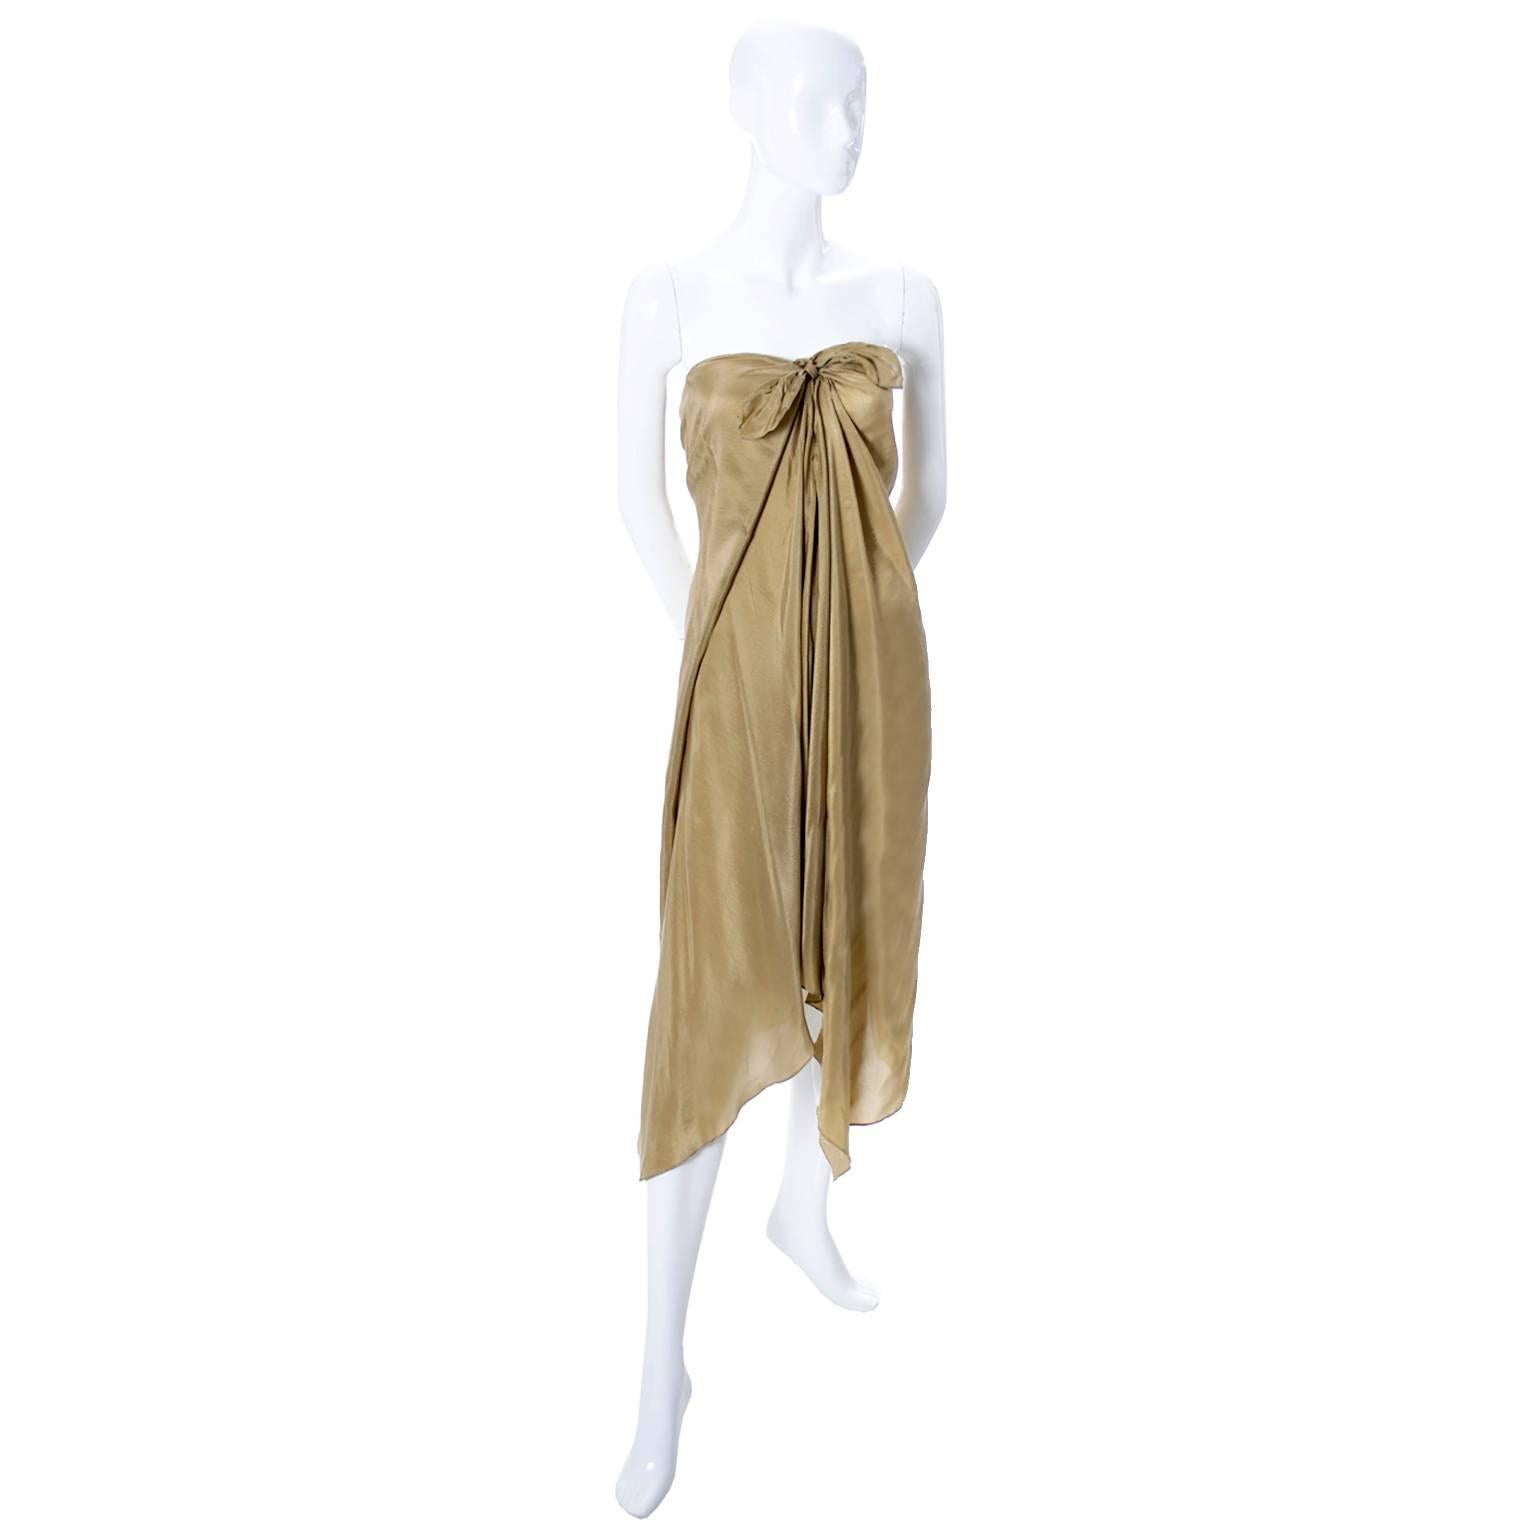 This pretty dress is new with its original tag and was designed by Ralph Lauren. The dress has the purple Ralph Lauren Collection label and is marked a size Medium.  This is a soft gold silk sarong or toga style dress that falls below the knee at